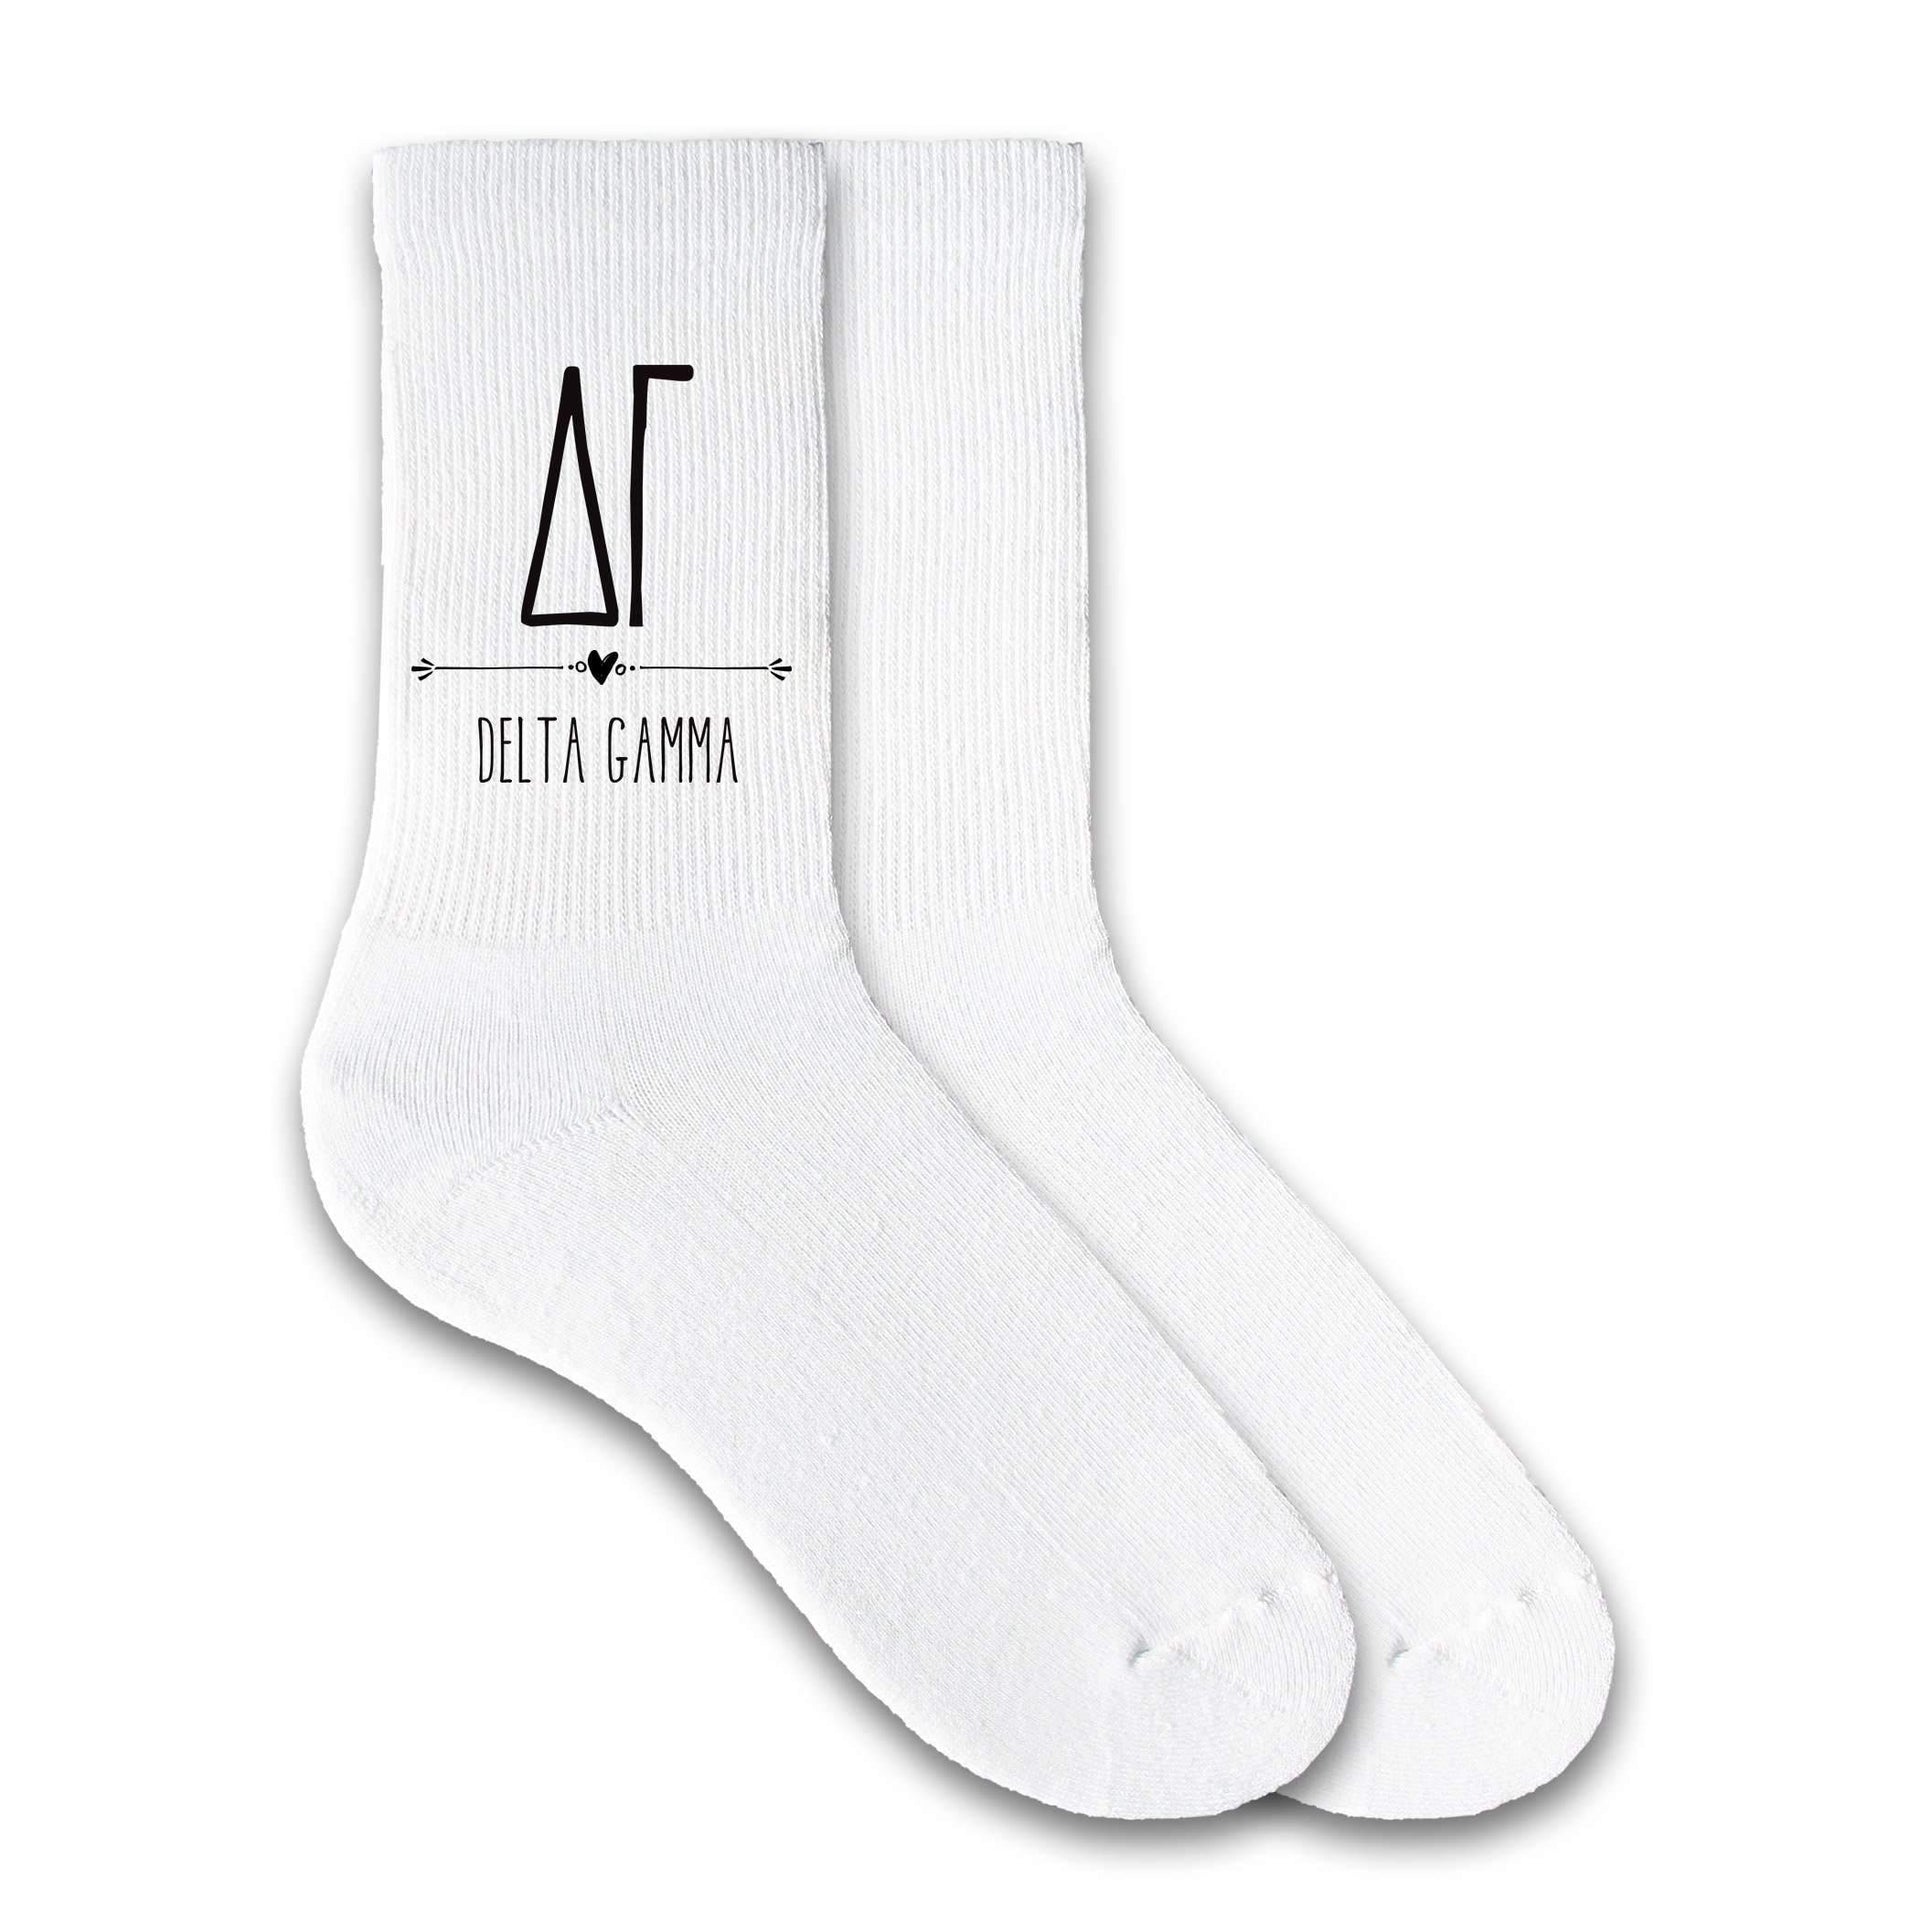 Delta Gamma sorority letters and name custom printed on cotton crew socks available in white, pink, or heather gray